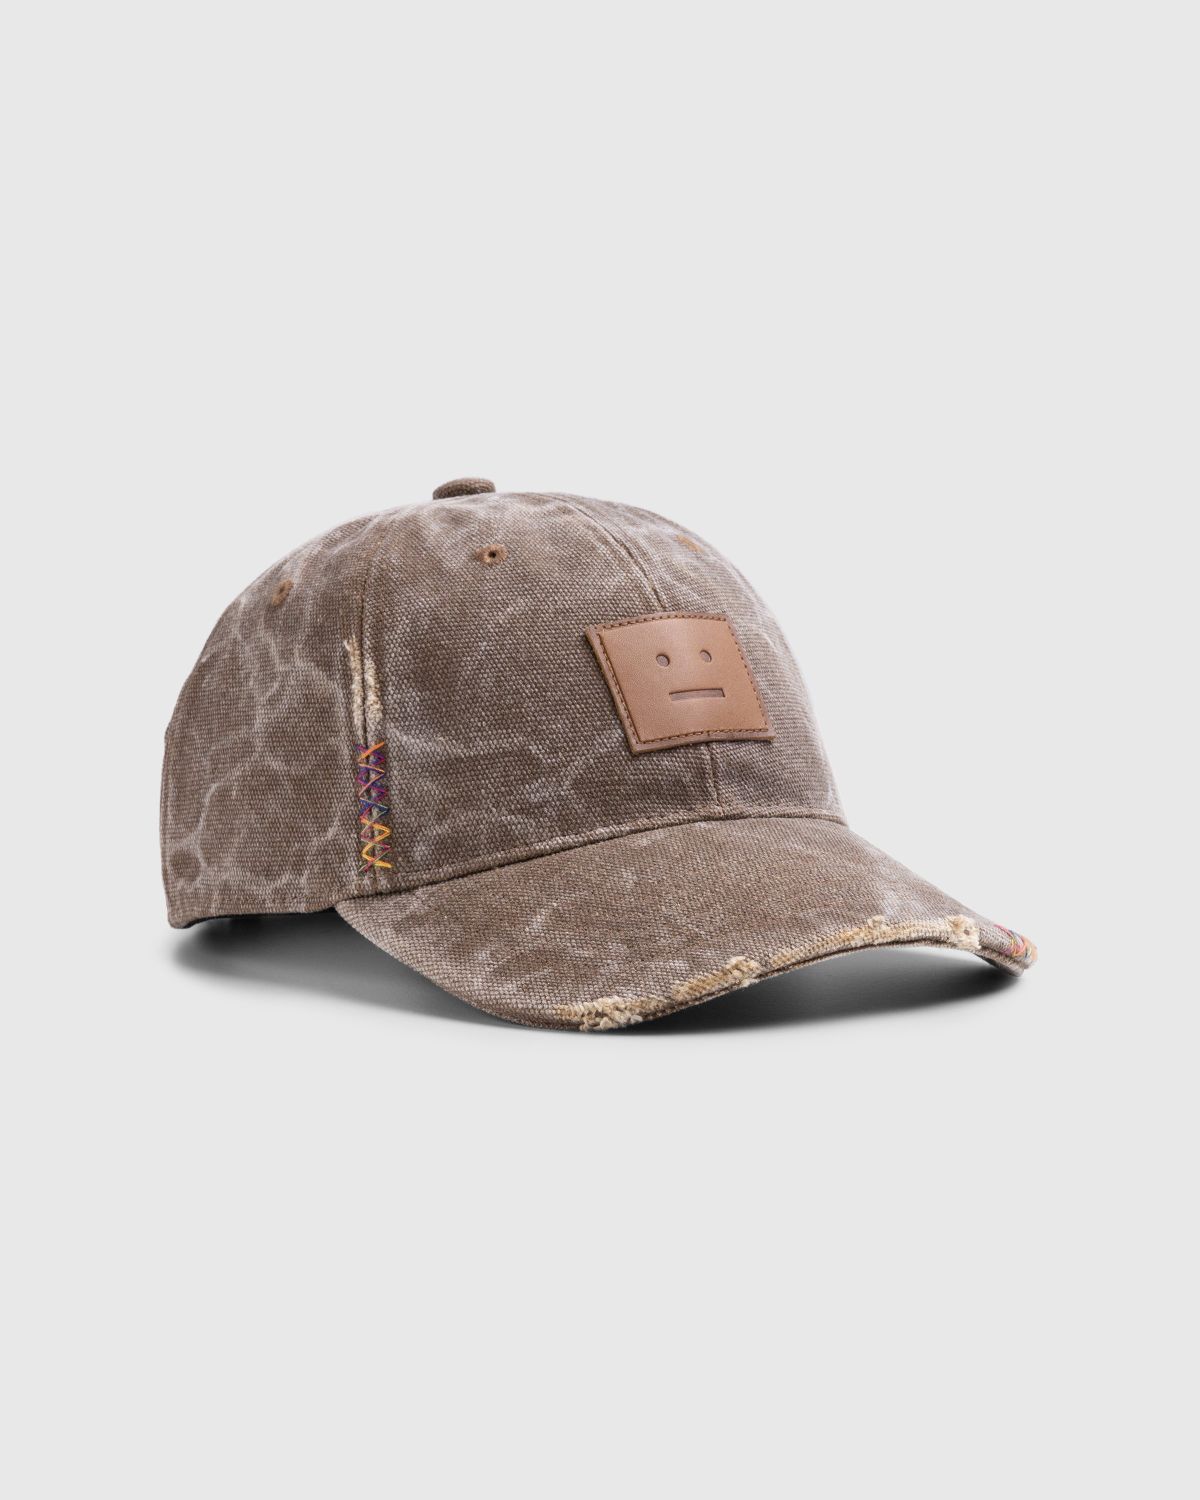 Acne Studios – Leather Face Highsnobiety Patch Toffee Shop Cap | Brown